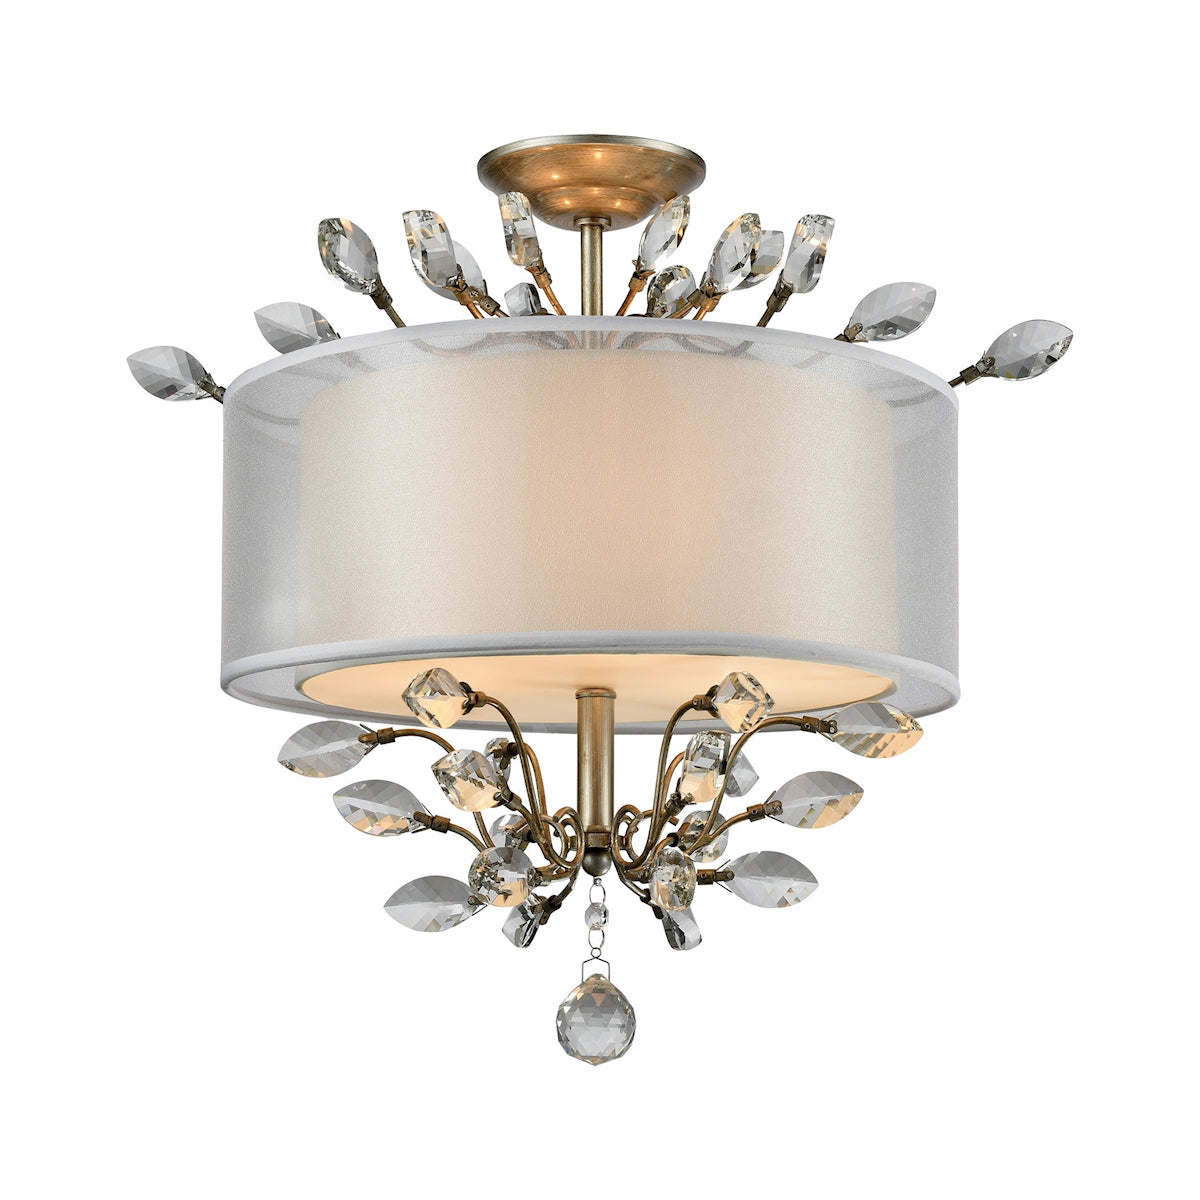 ELK Lighting 16281/3 Asbury 3-Light Semi Flush in Aged Silver with Organza and Fabric Shade